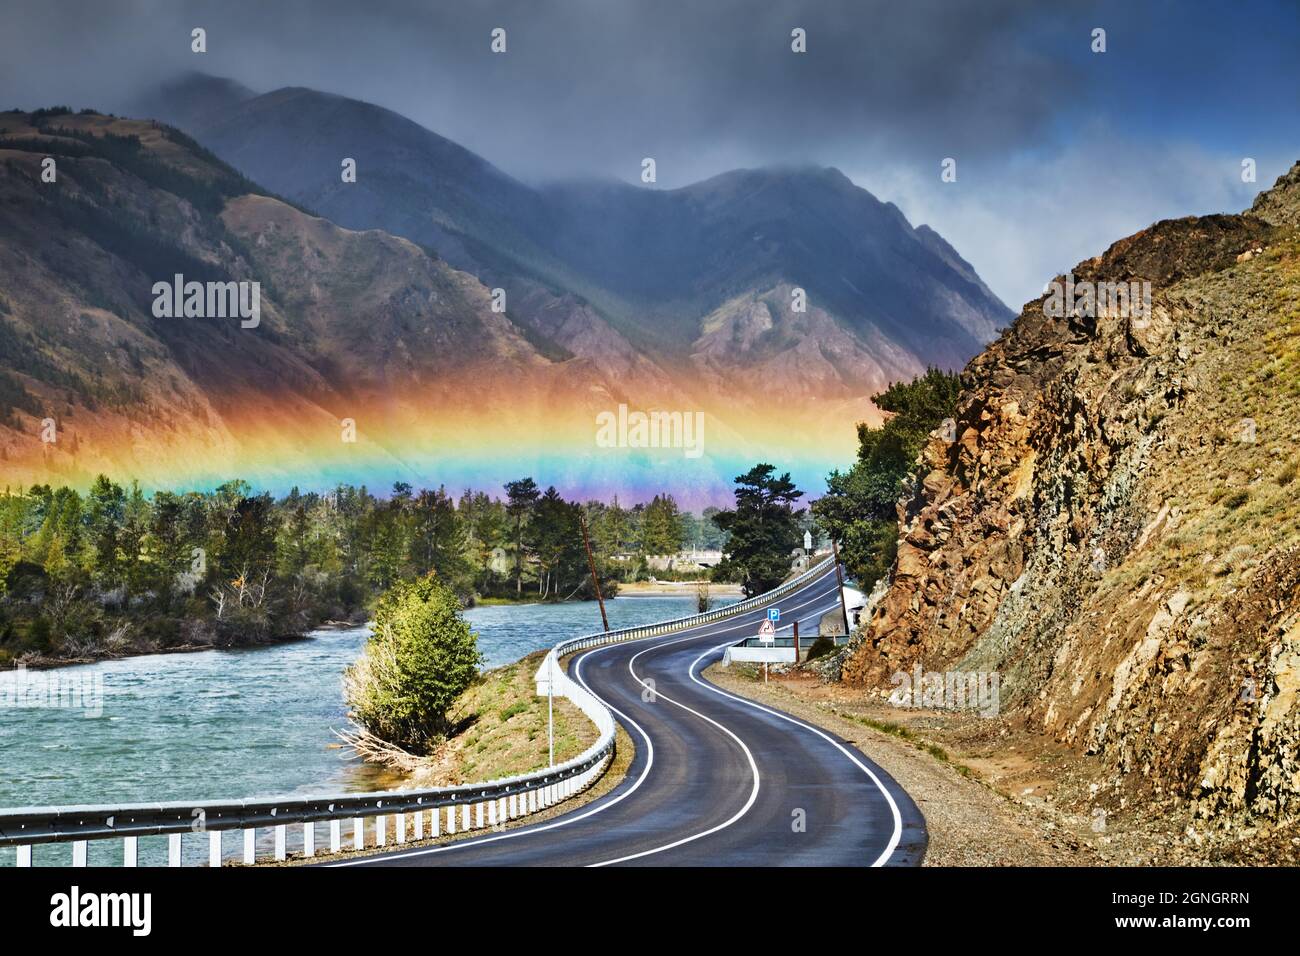 The Chuysky Trakt one of the most beautiful mountain roads of the world, Chuya river and rainbow over road Stock Photo